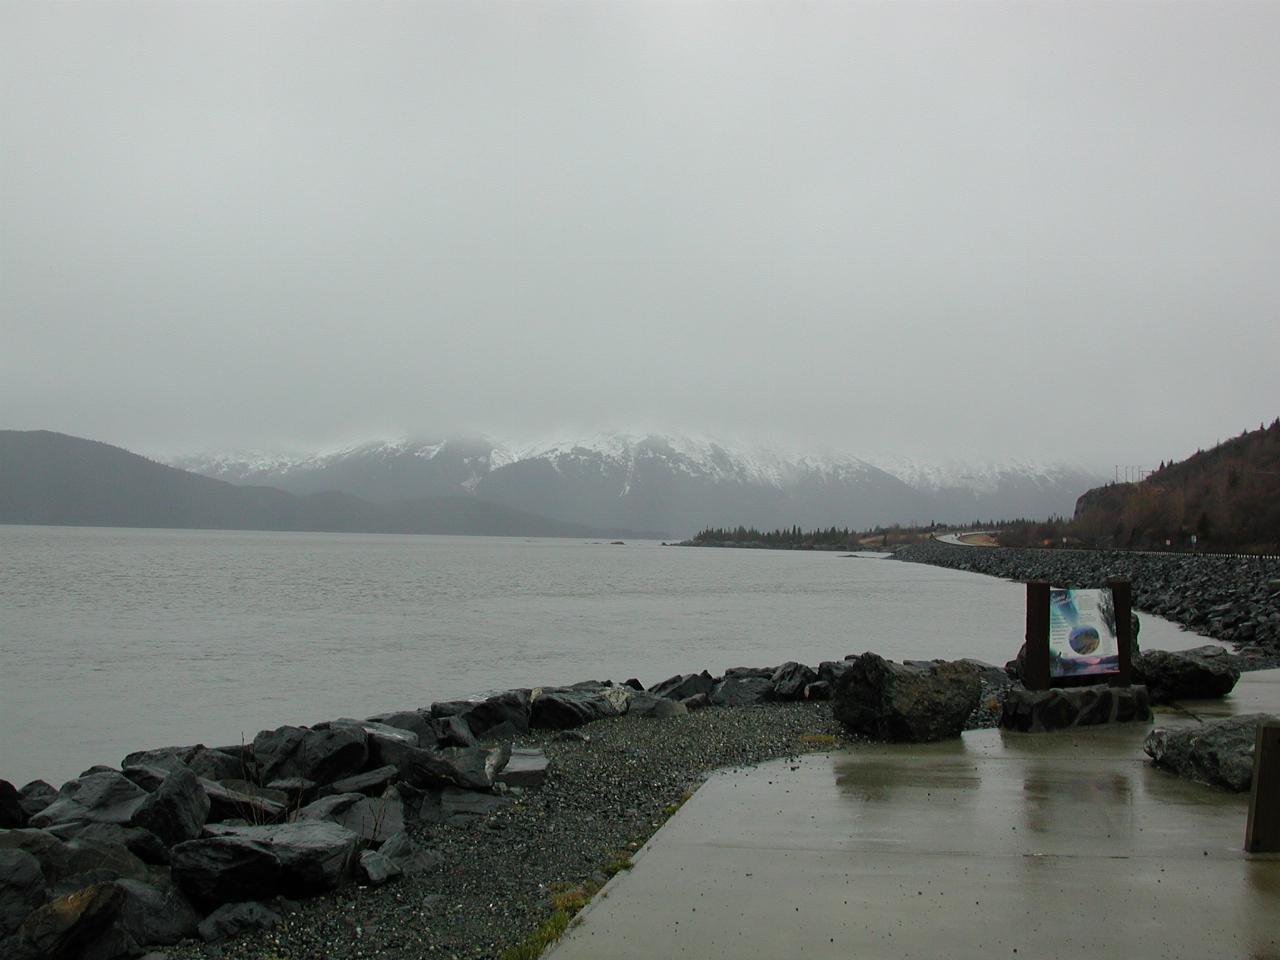 Turnagain Arm of Cook Inlet, south of Anchorage, headed towards Seward